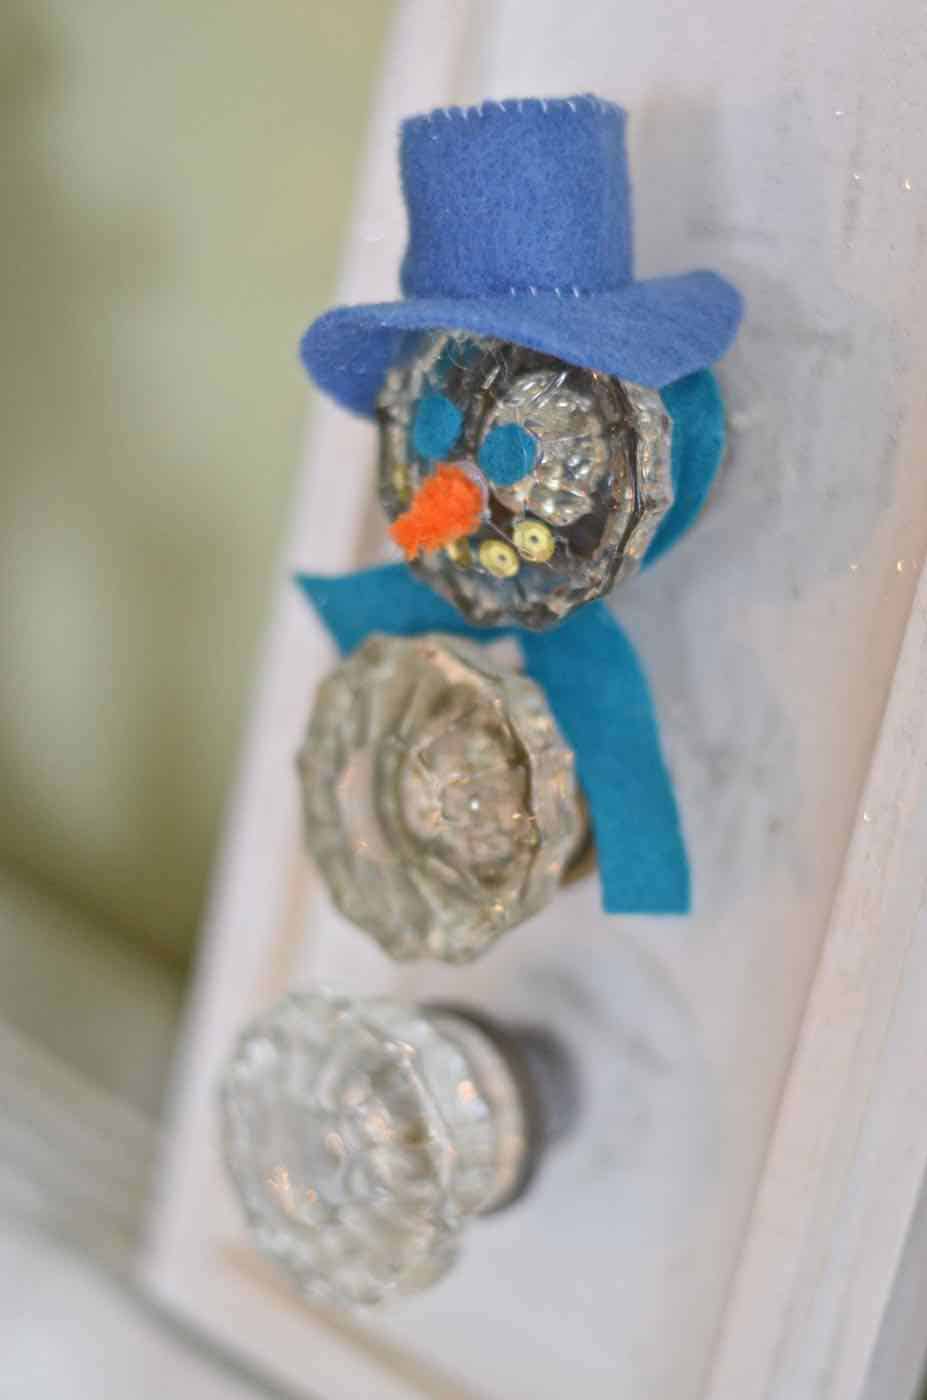 Transform thrifted glass doorknobs into repurposed Christmas snowman.